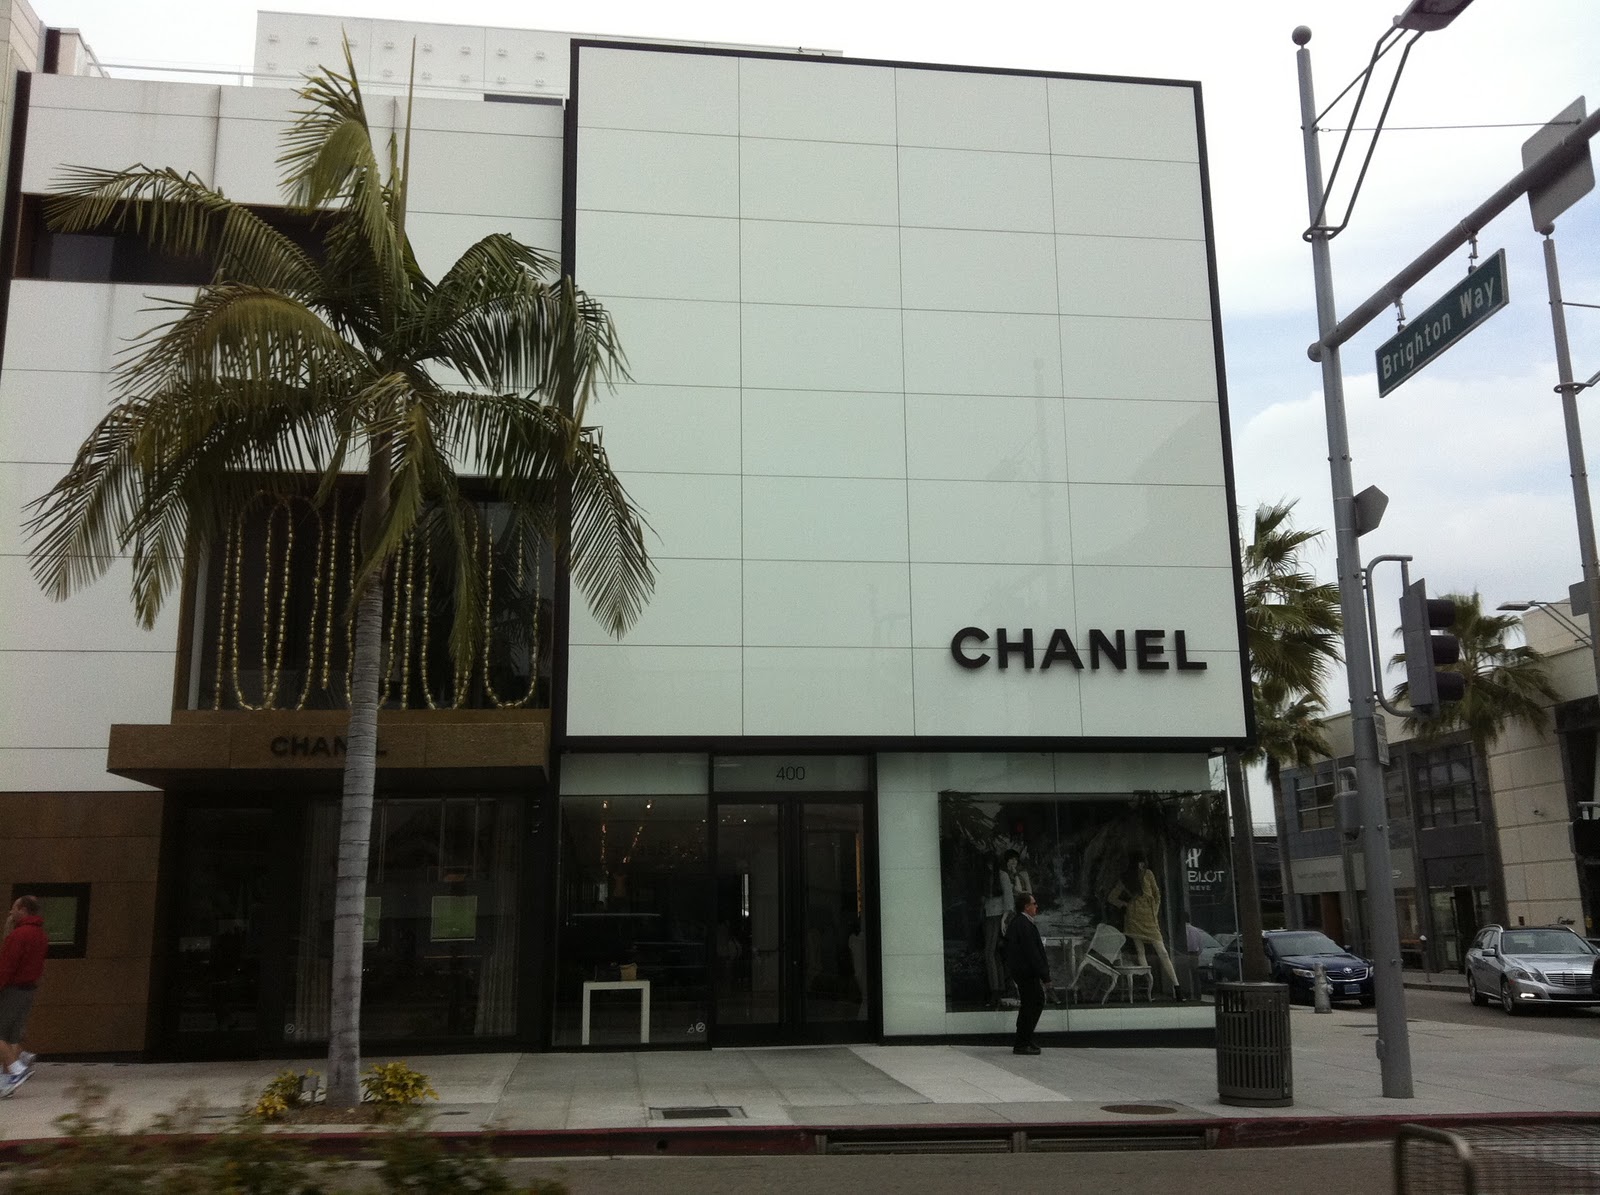 Black Sparrows Nest: Los Angles Chanel Store